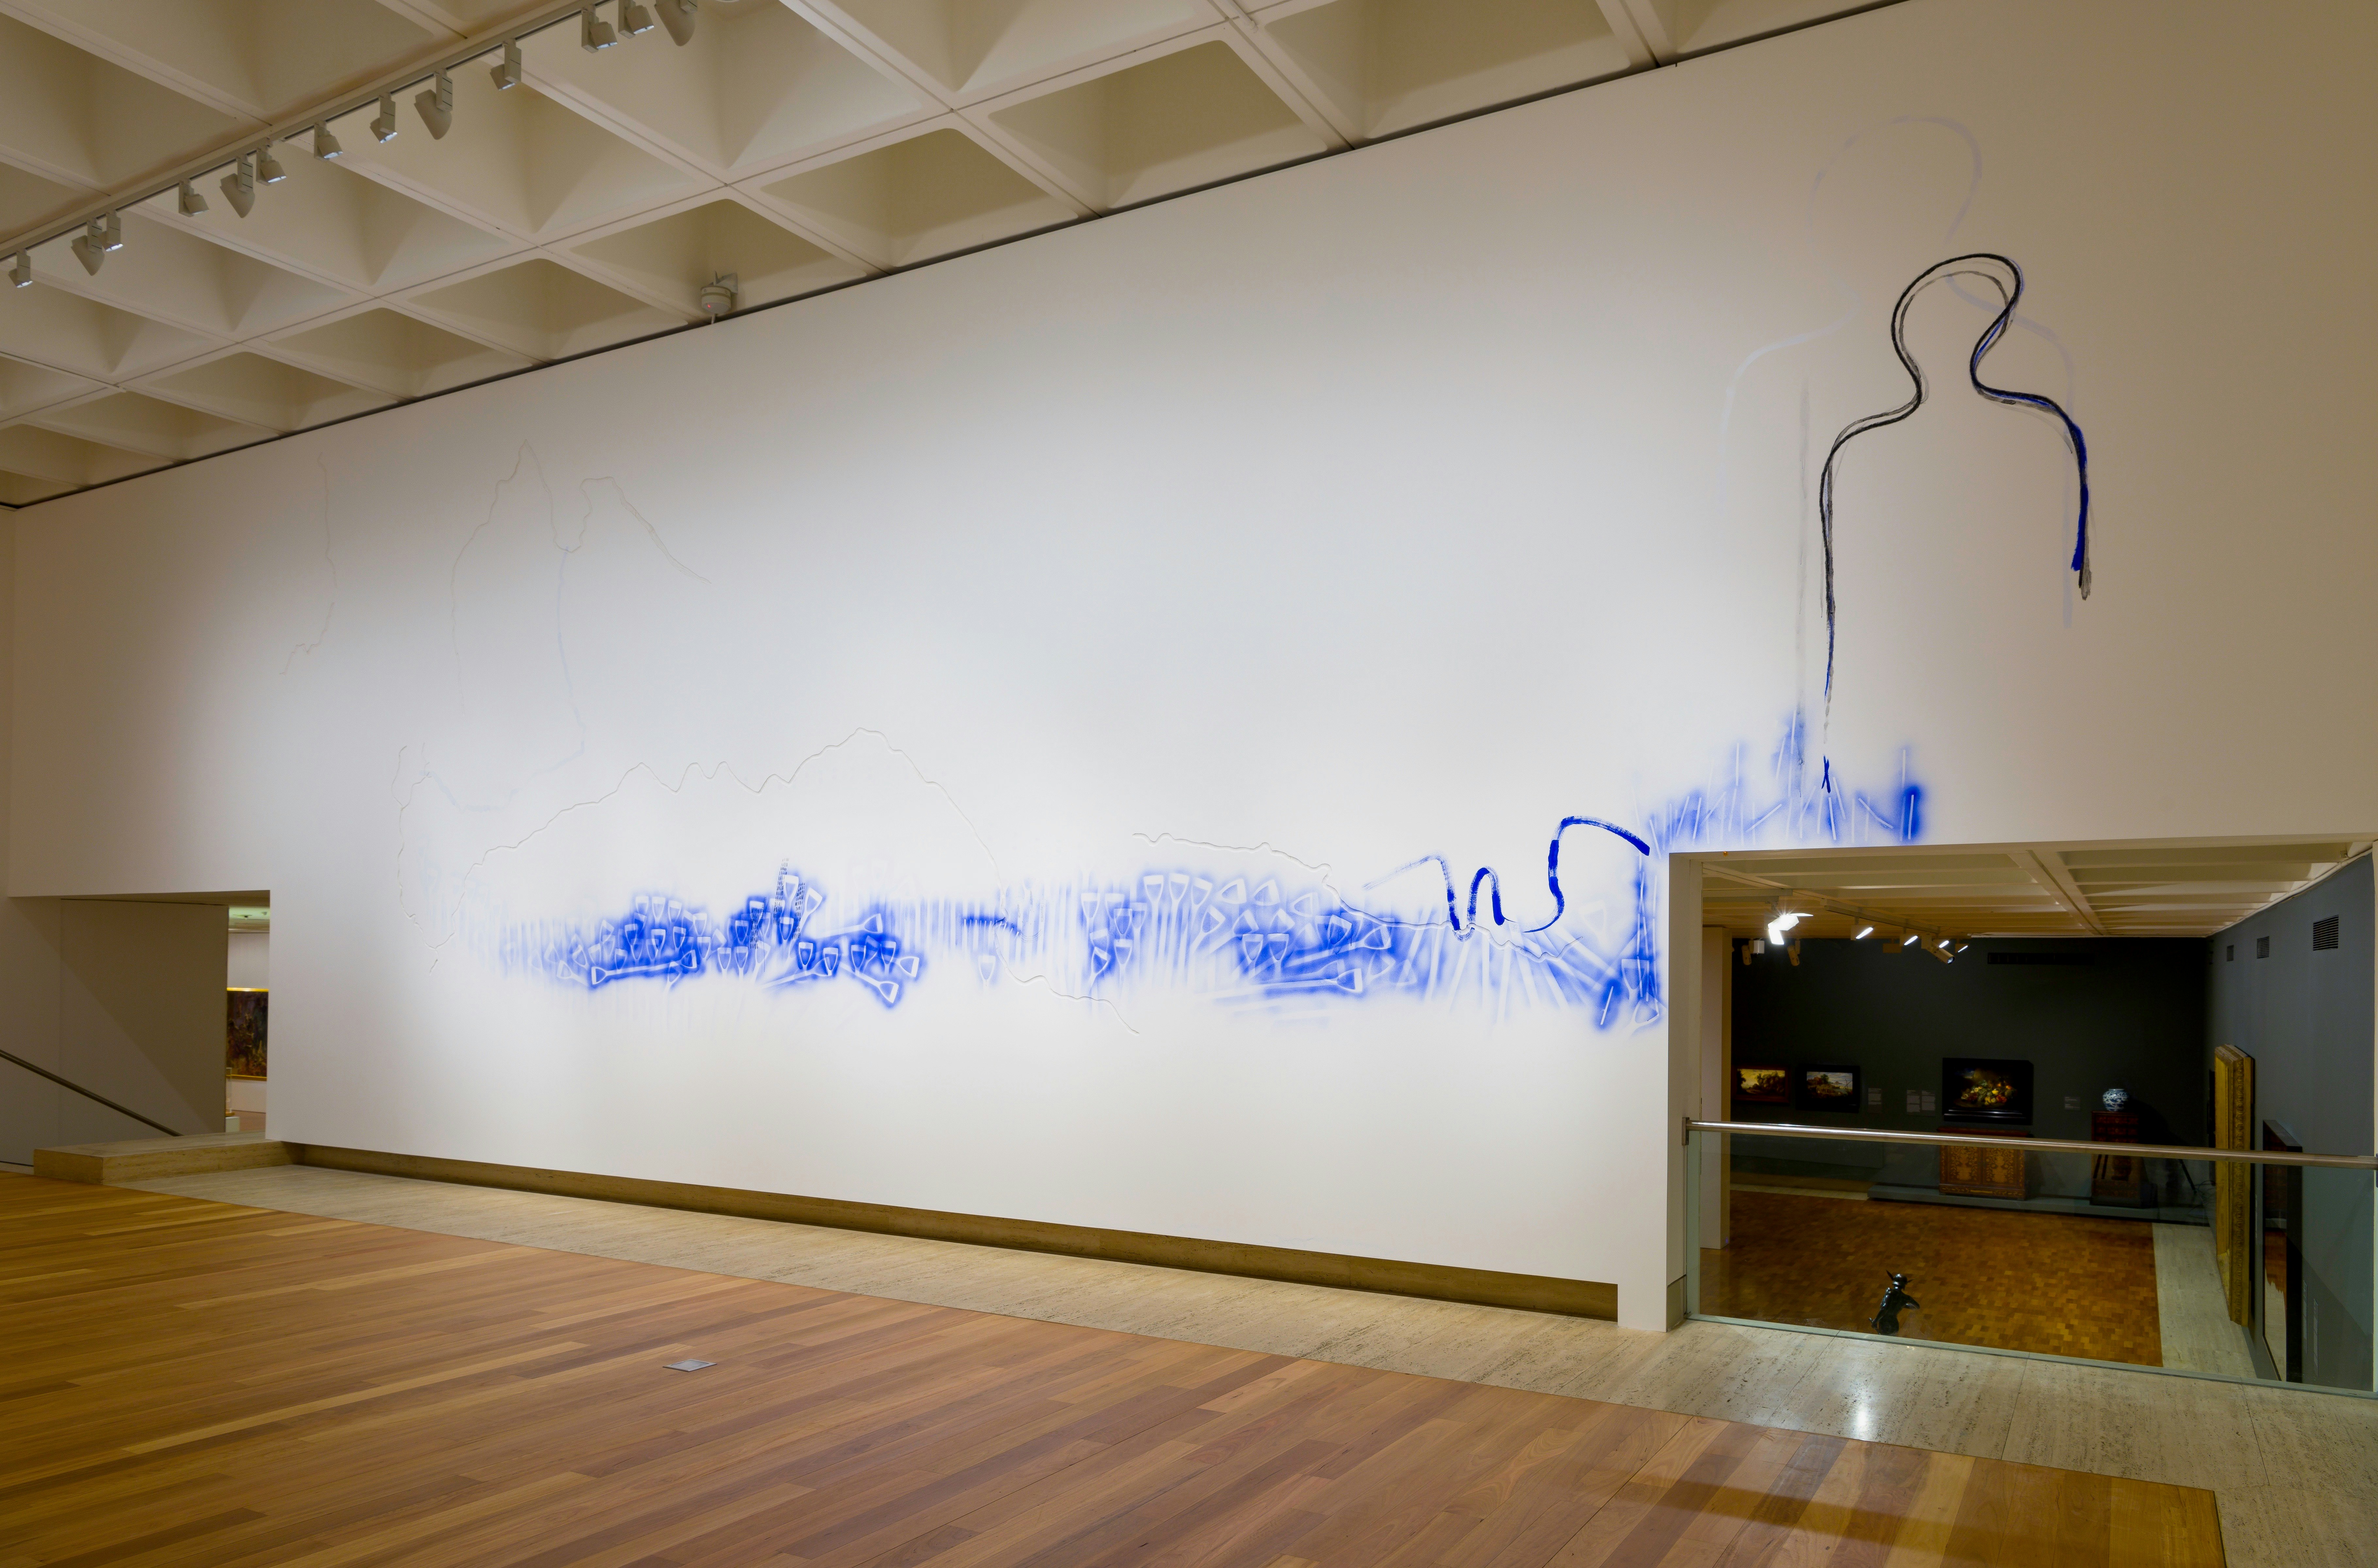 A high-ceilinged white wall in an art gallery painted with a blue substance under a painted outline that resembles a person's shadow.